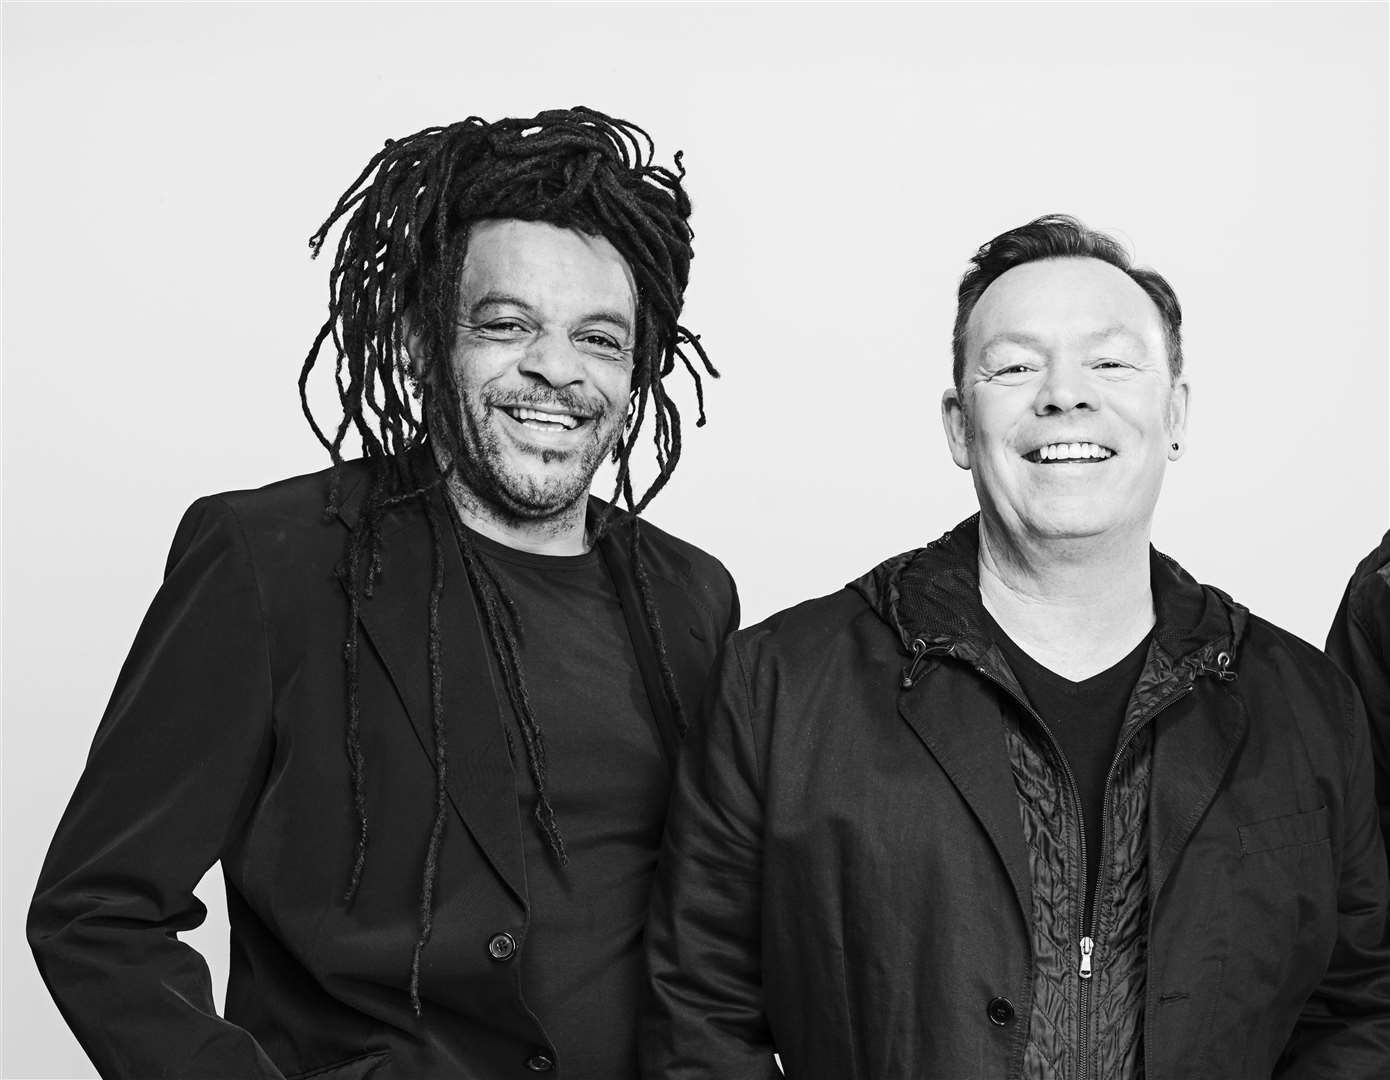 UB40 featuring Astro and Ali Campbell will be at Dreamland